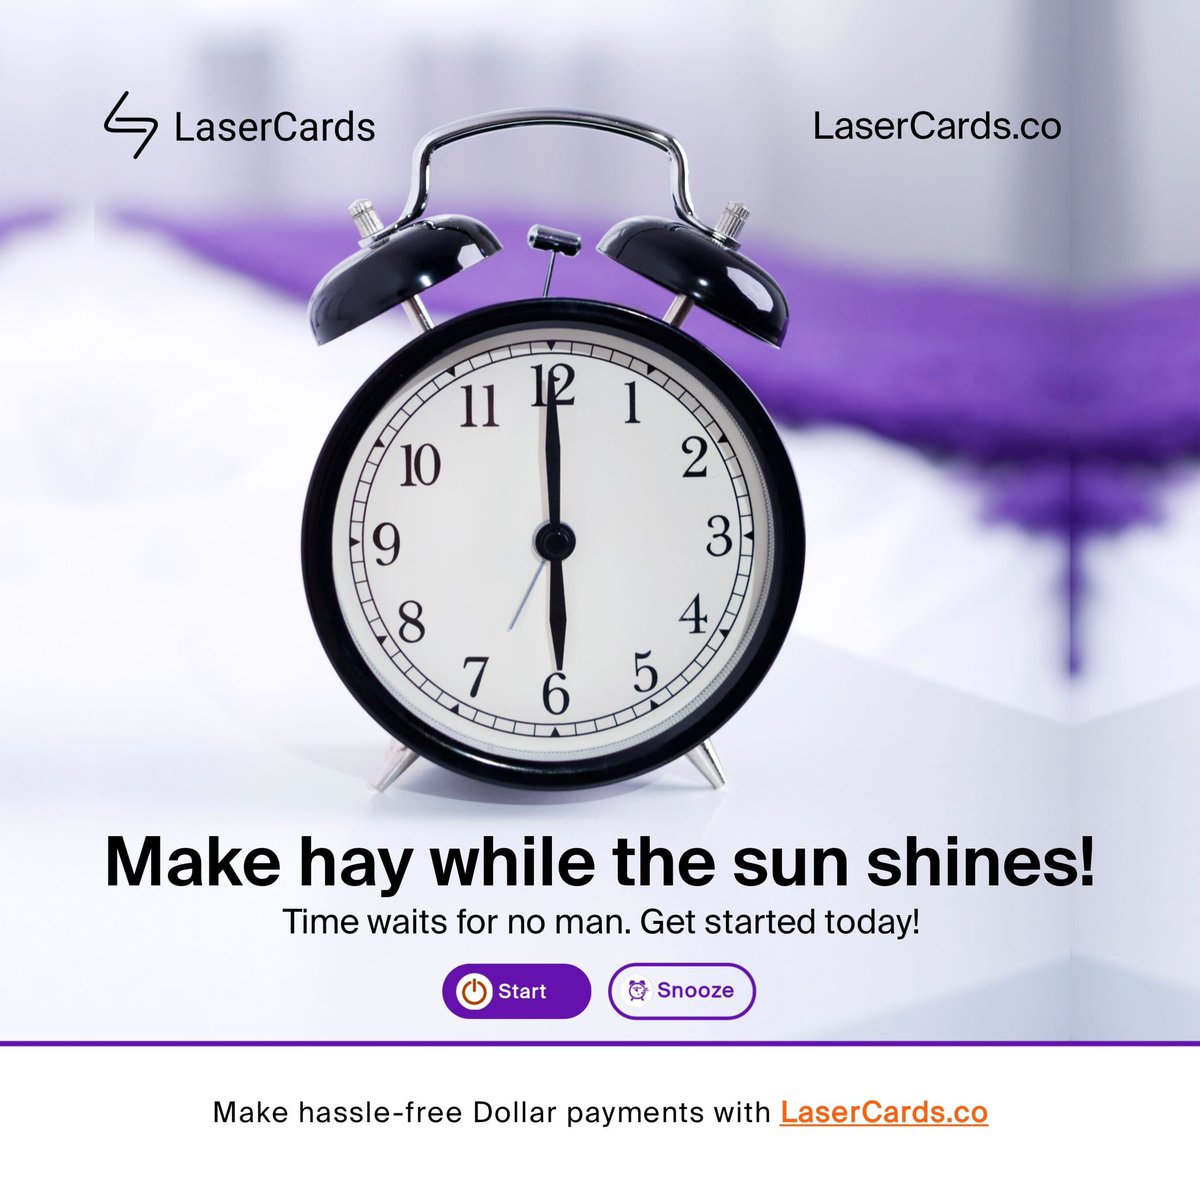 New day, new possibilities! Get started now with LaserCards for easy and secure payments. 

Follow @lasercardsco for more valuable financial tips, deals and seamless payment solutions.

#LaserCardsCo #LaserCards #VirtualDollarCards #VirtualPayments #OnlinePayments #DollarCards